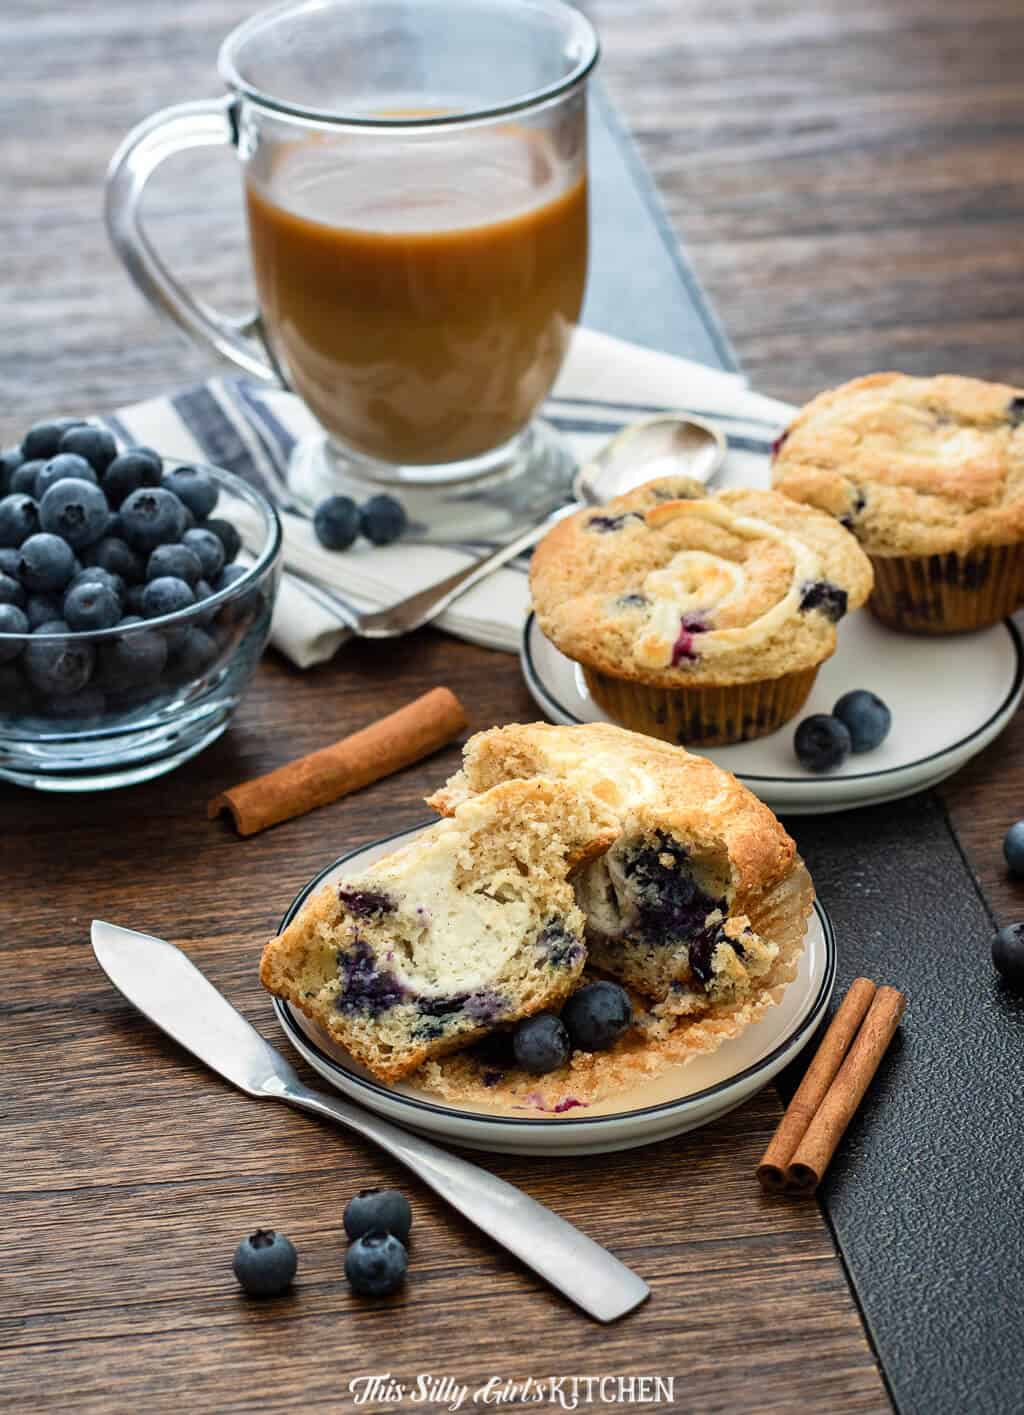 Muffins on plate with one split muffin and coffee and blueberries in background.